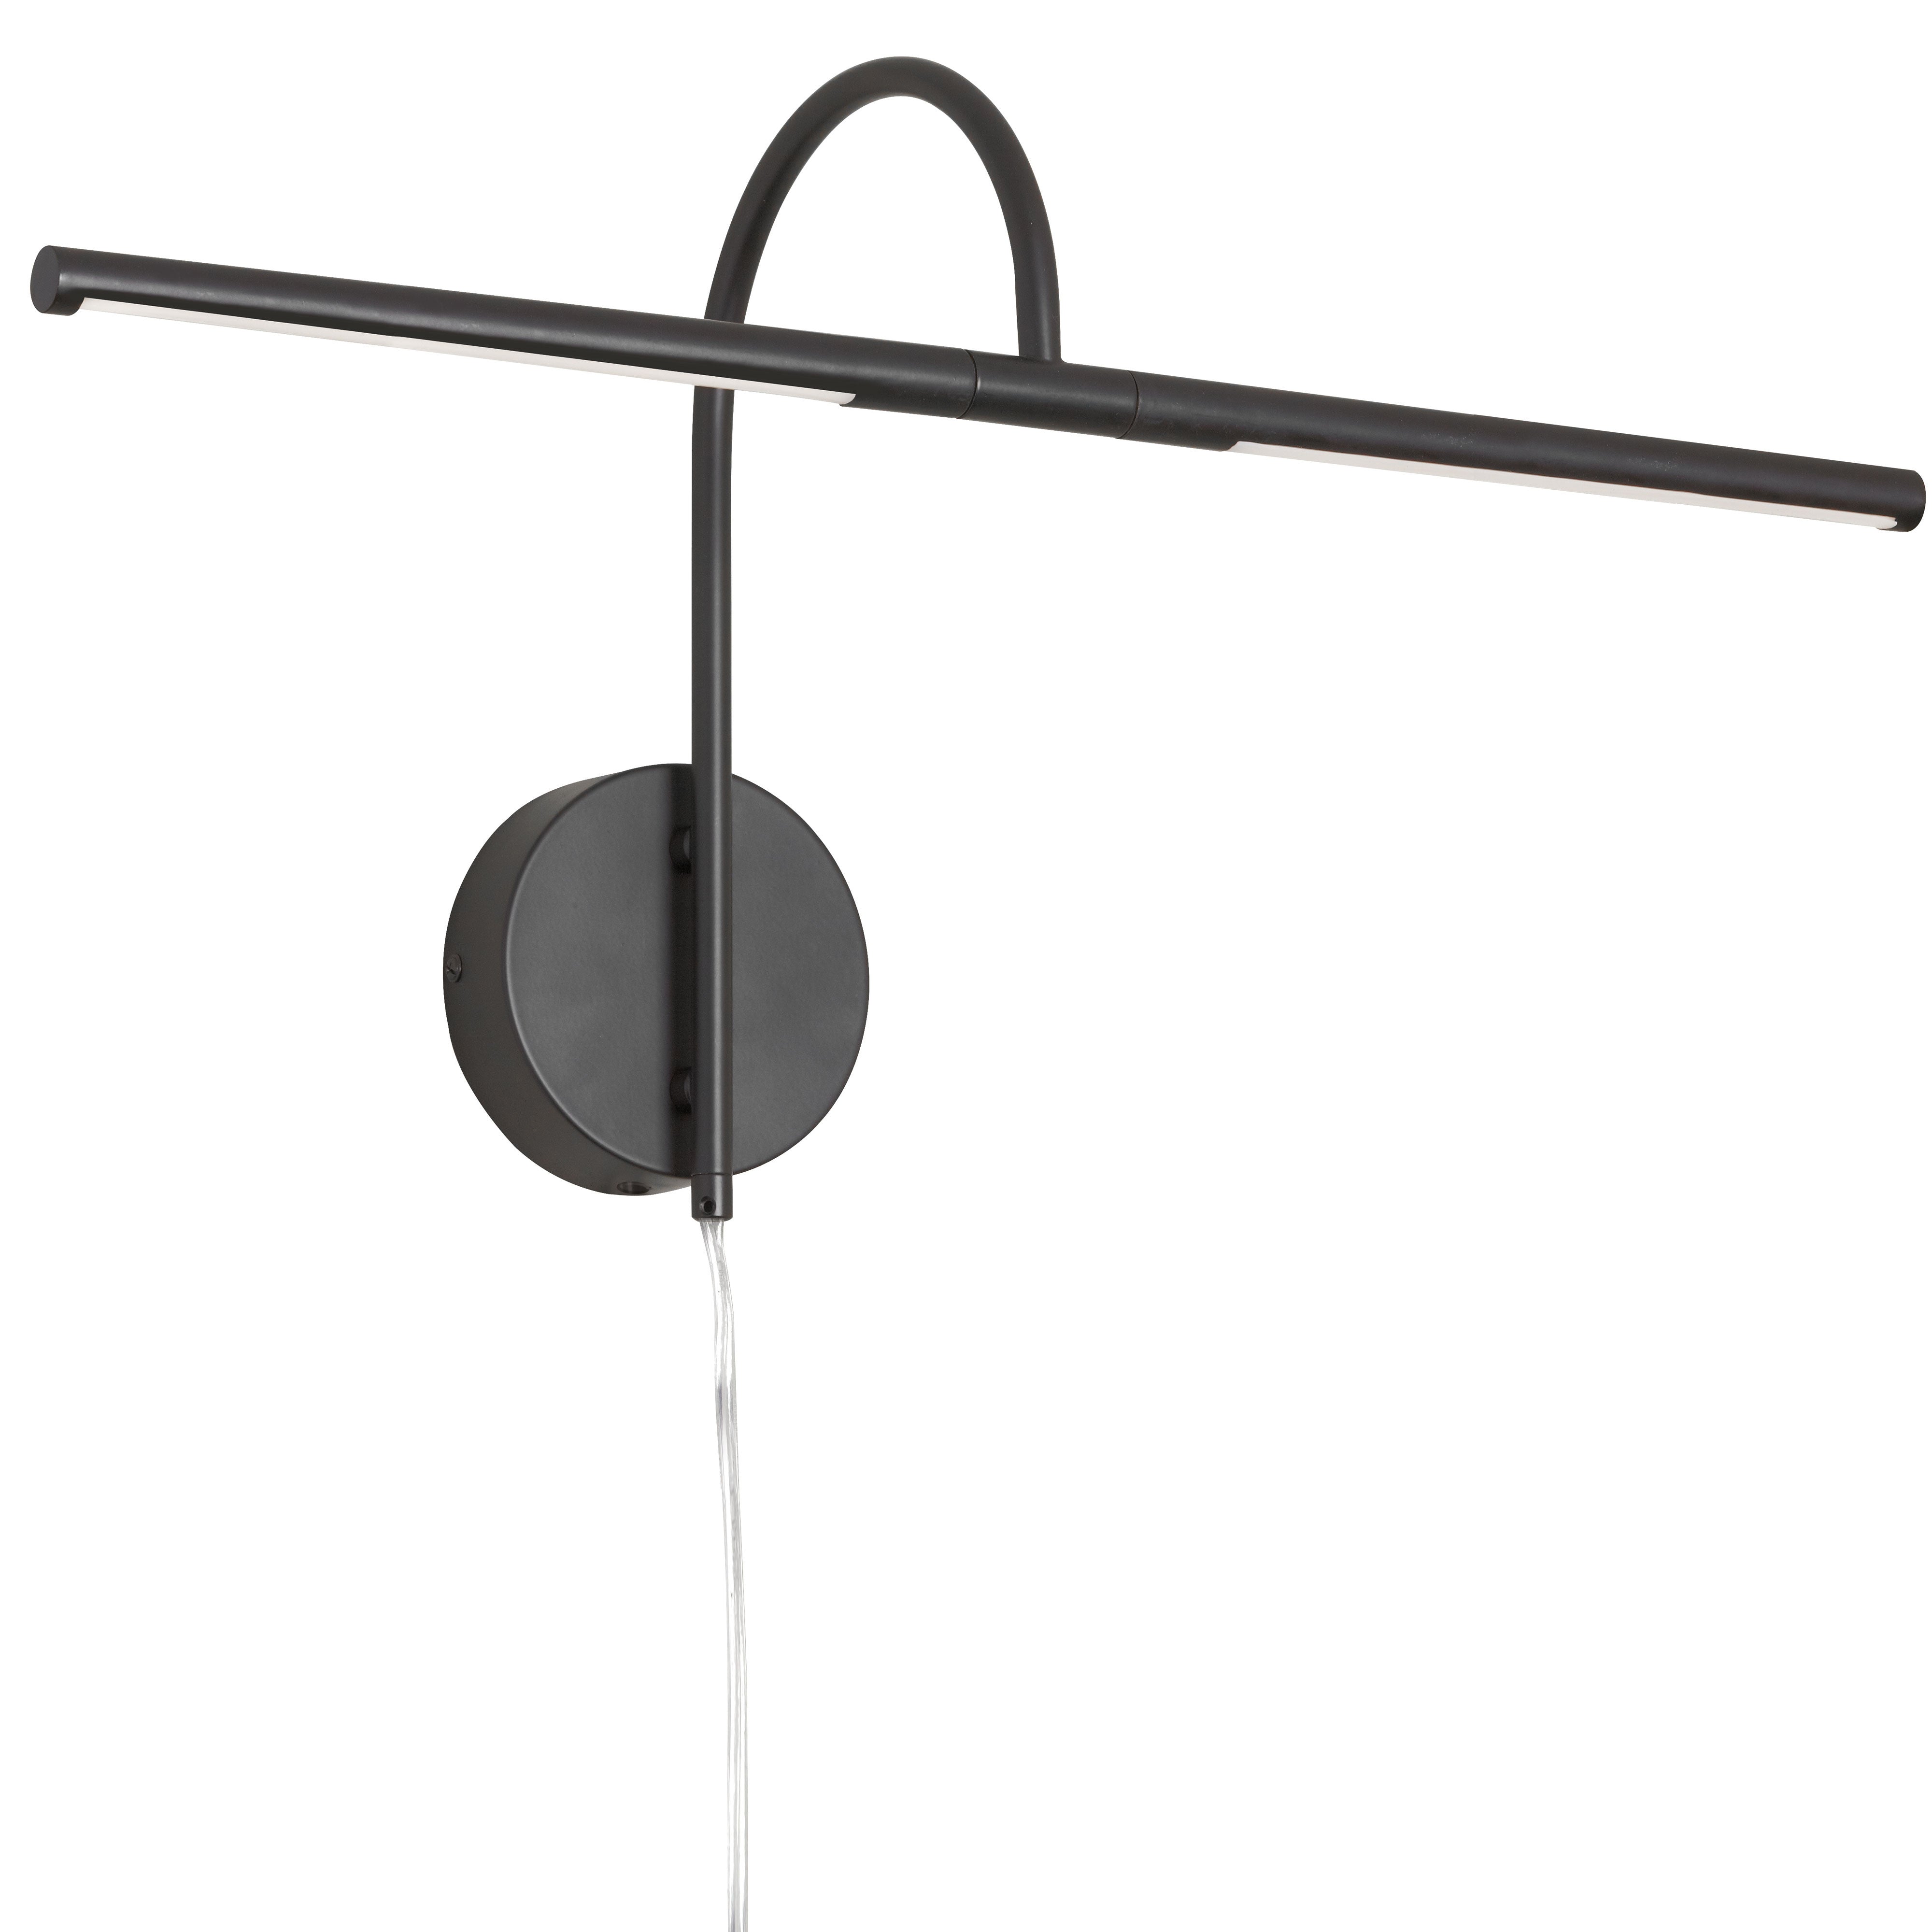 DISPLAY/EXHIBIT Wall sconce à tableau Black INTEGRATED LED - PICLED-242-MB | DAINOLITE